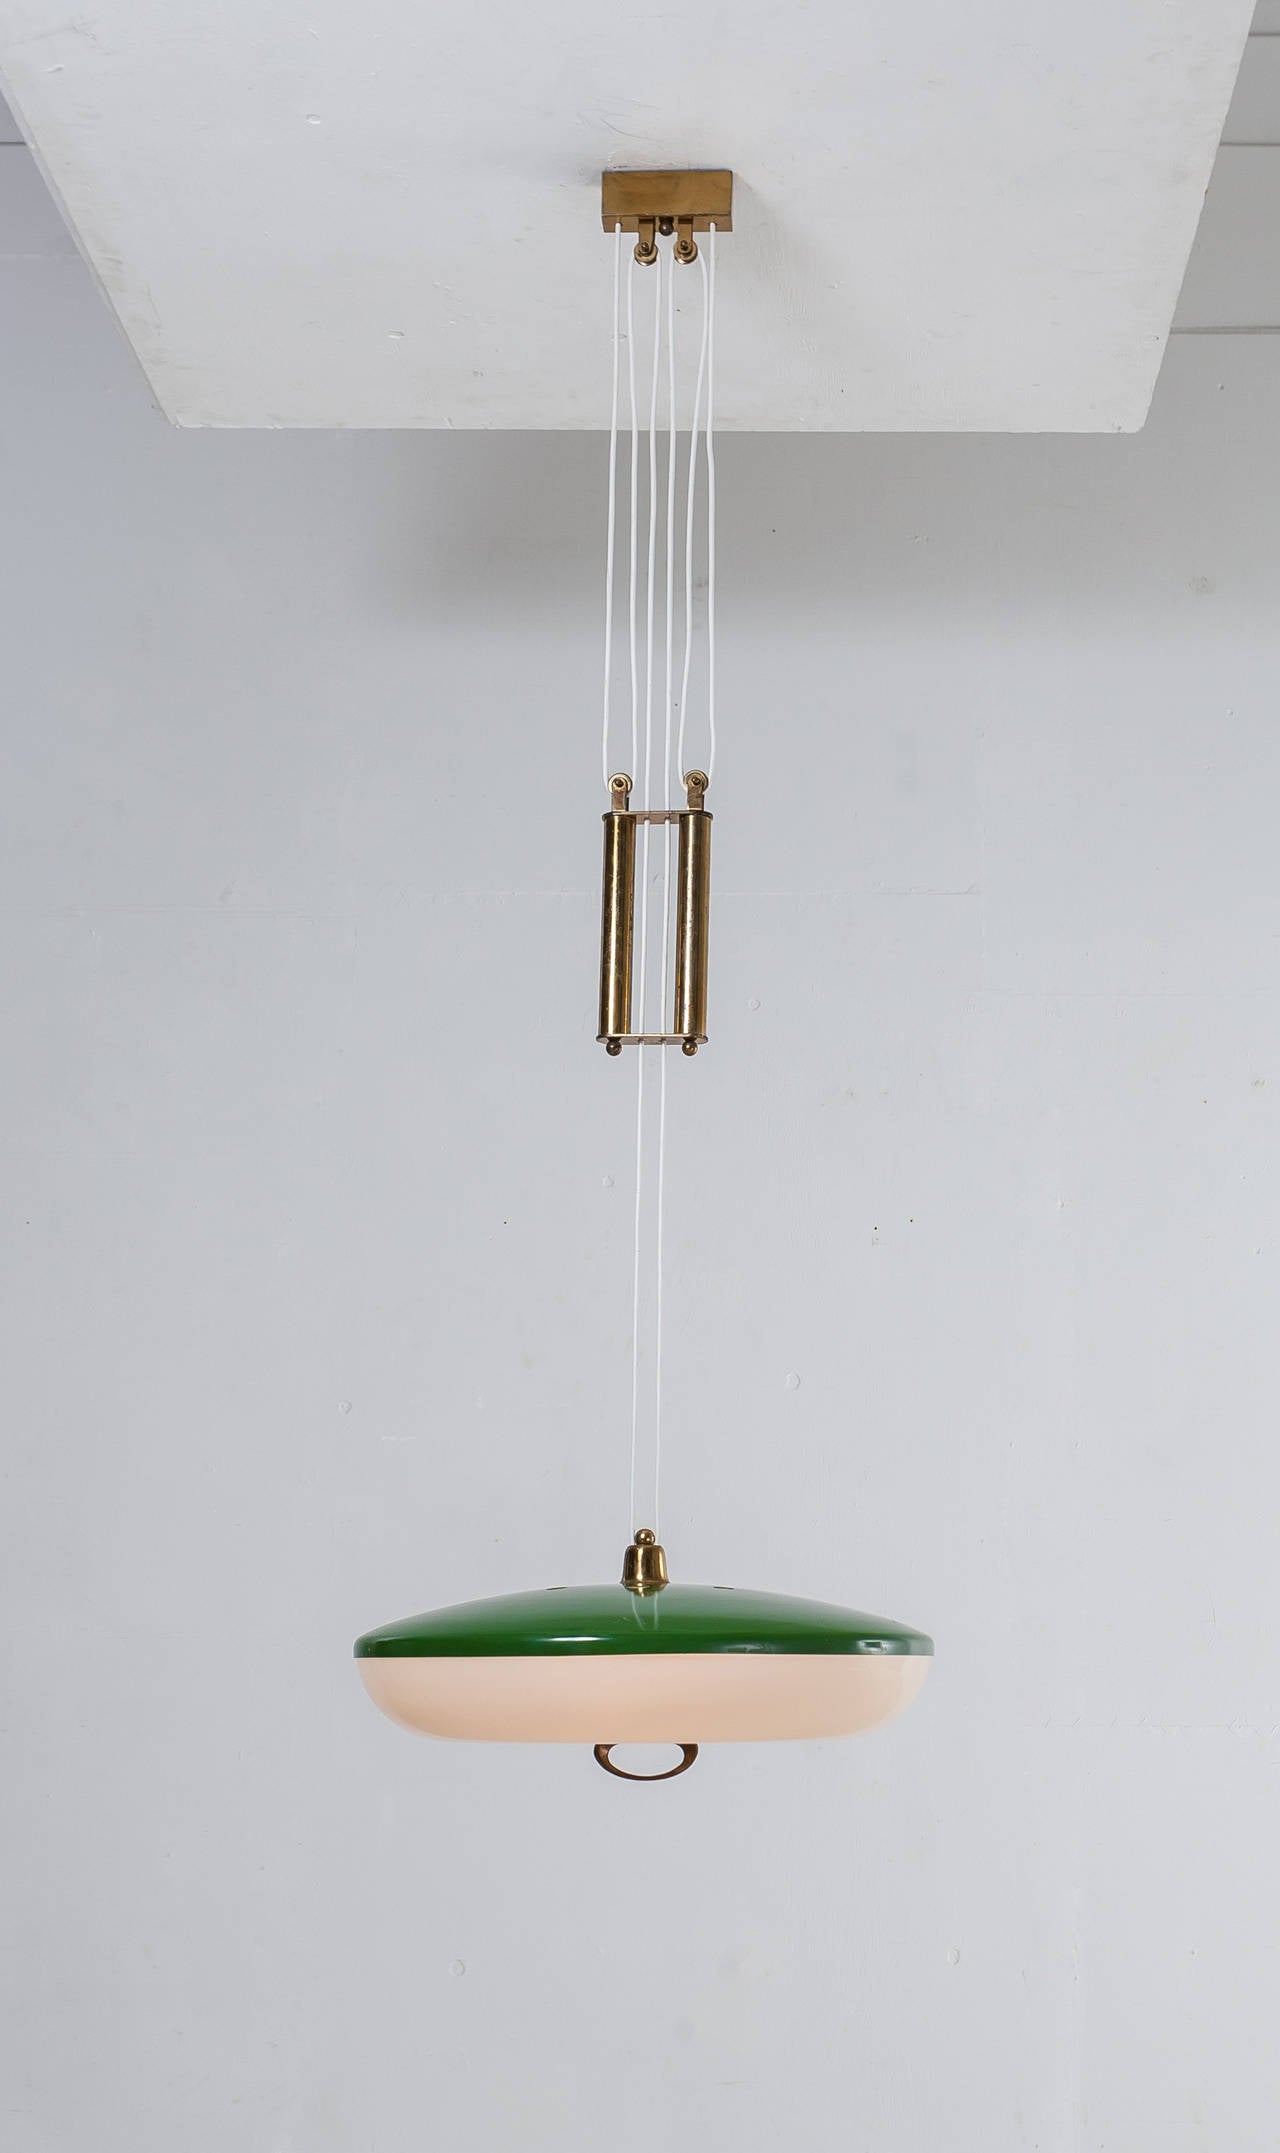 A 1950s Stilnovo pill shaped pendant made of a green lacquered metal shade with a plastic diffuser. The lamp is height-adjustable by means of the brass pull and the beautiful double counterweight in brass.

* This piece is offered to you by